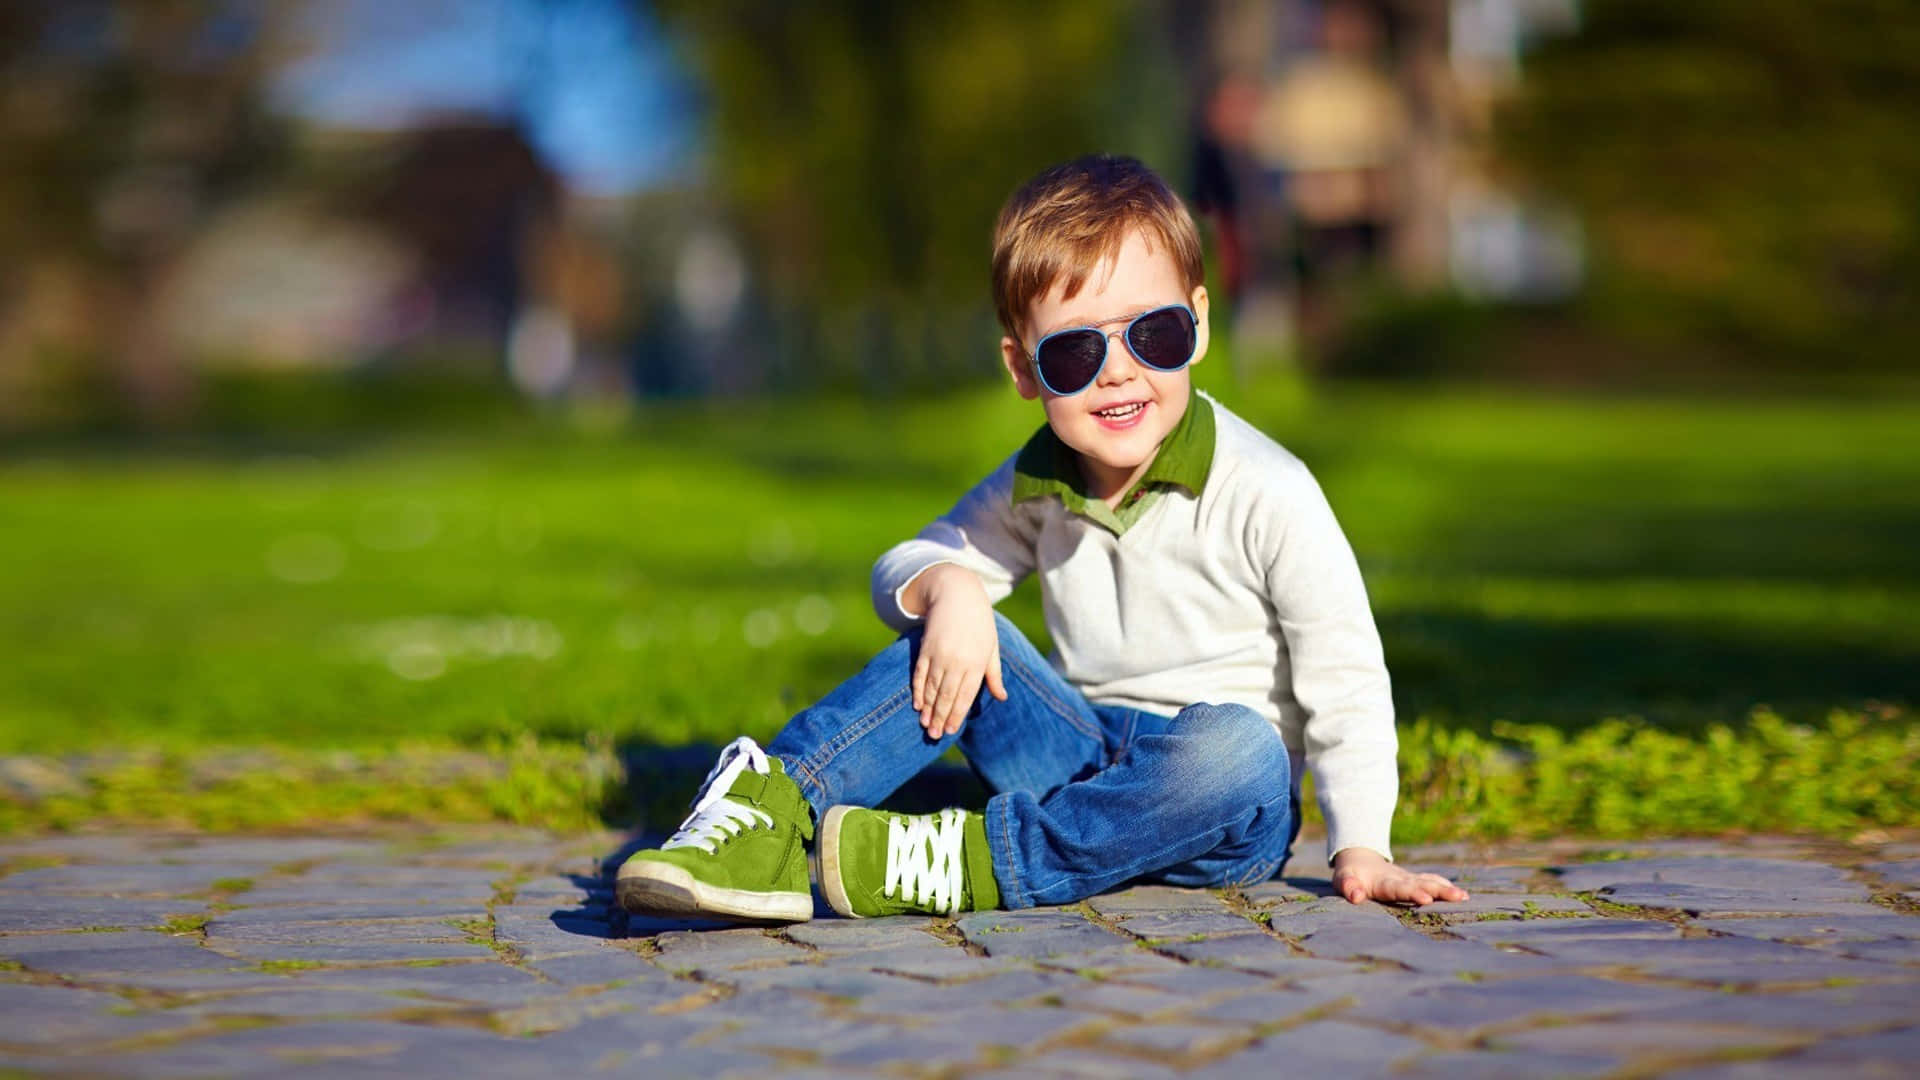 A Young Boy Wearing Sunglasses Sitting On The Ground